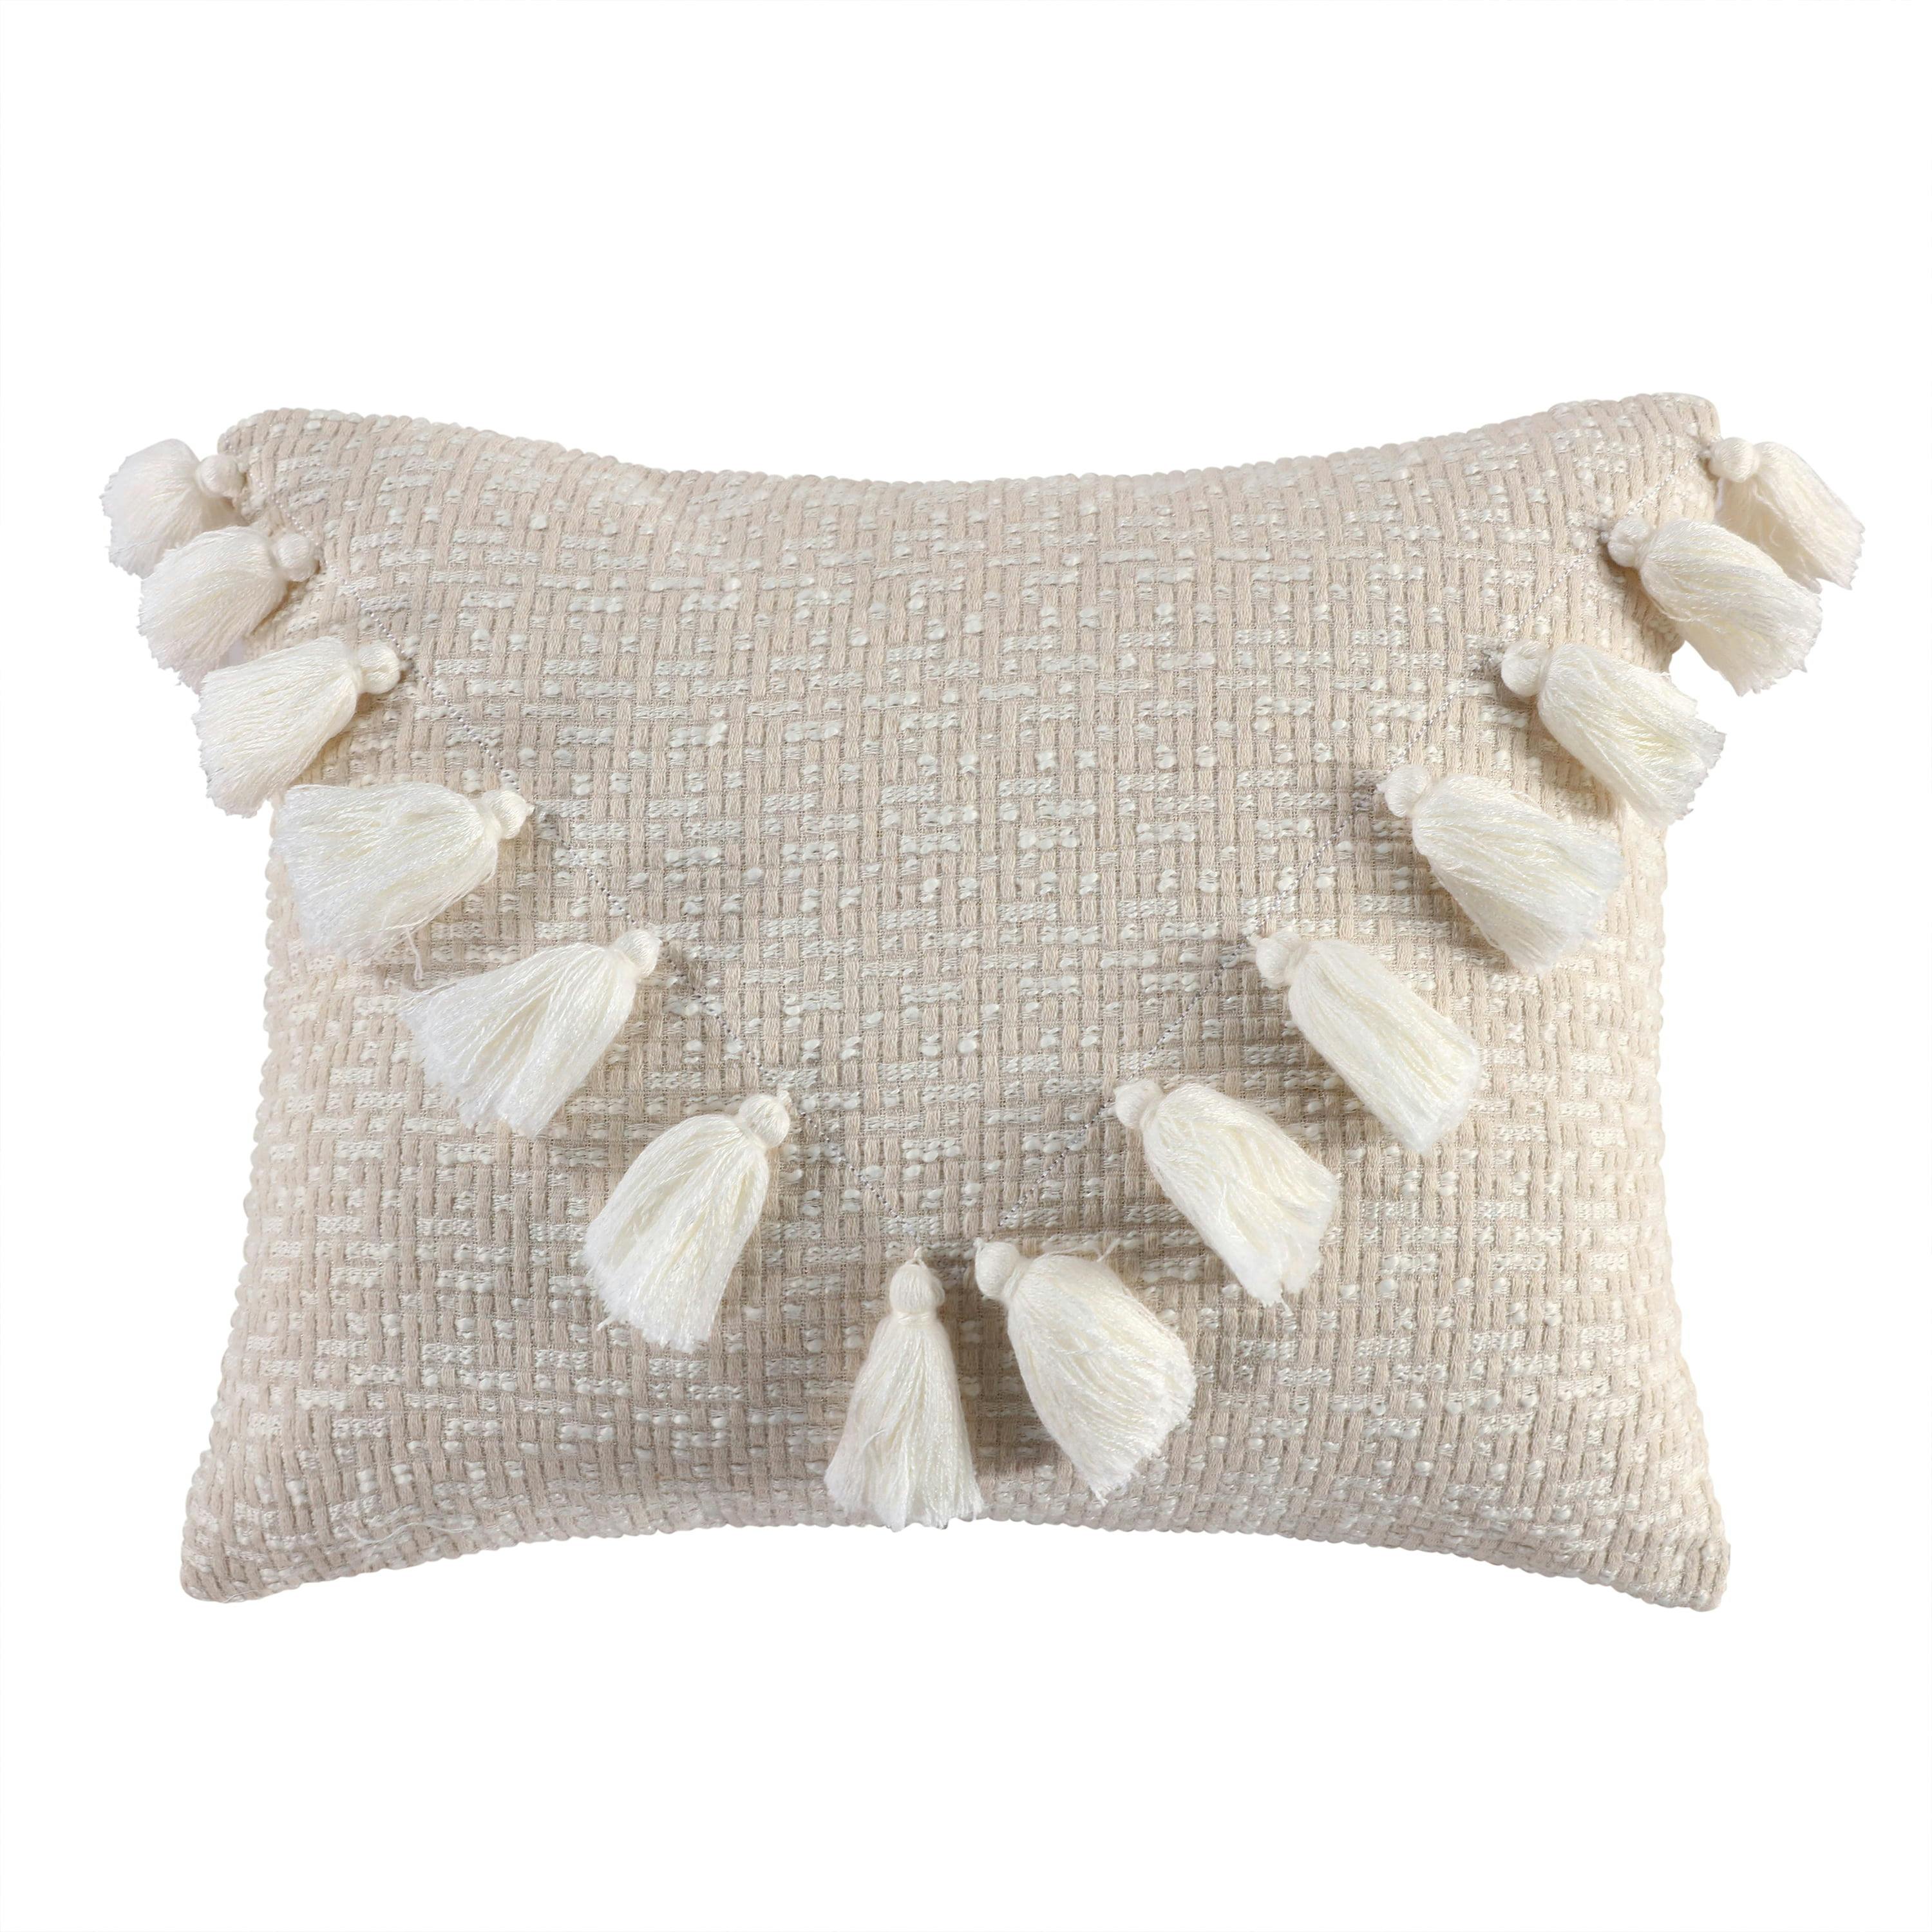 Taupe Cream Embroidered Tassel Decorative Pillow 14x18